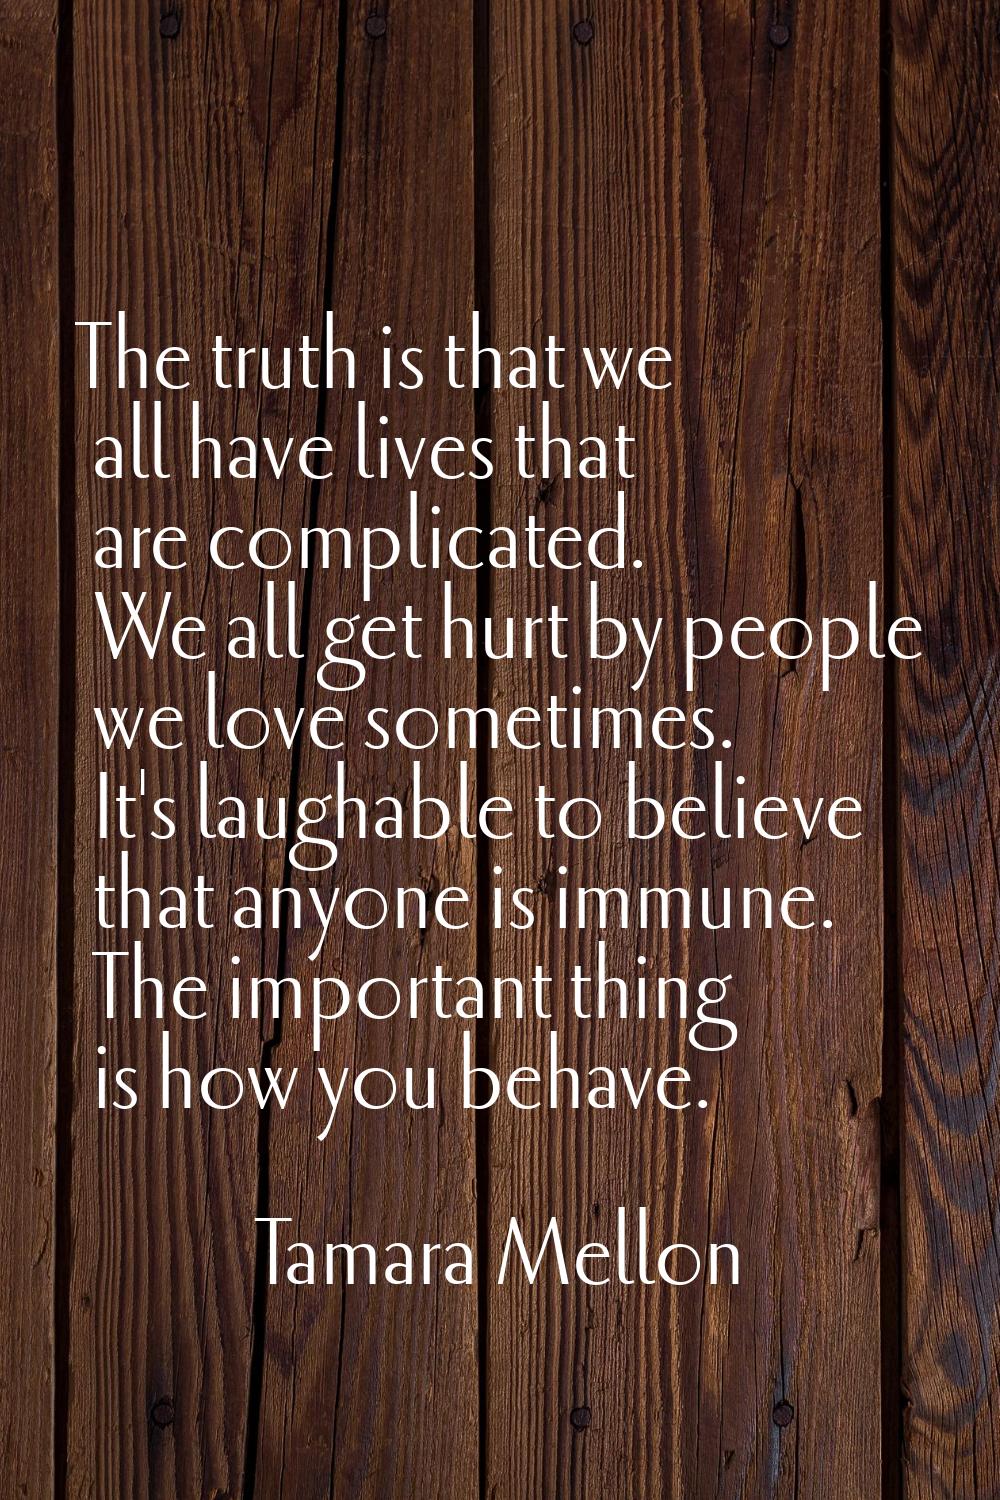 The truth is that we all have lives that are complicated. We all get hurt by people we love sometim